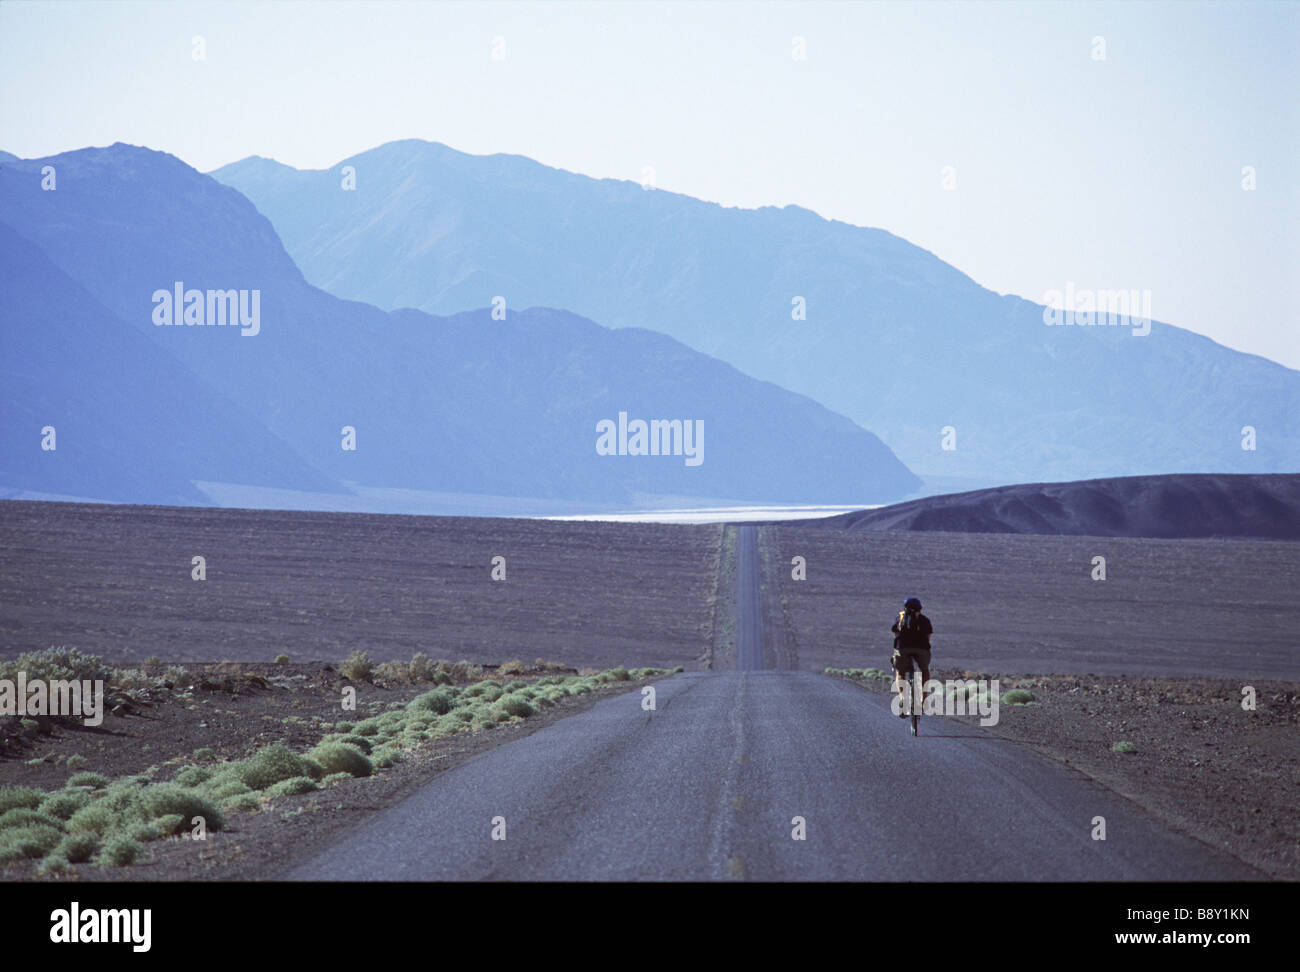 Man cycling on a highway, Death Valley, California, USA Stock Photo